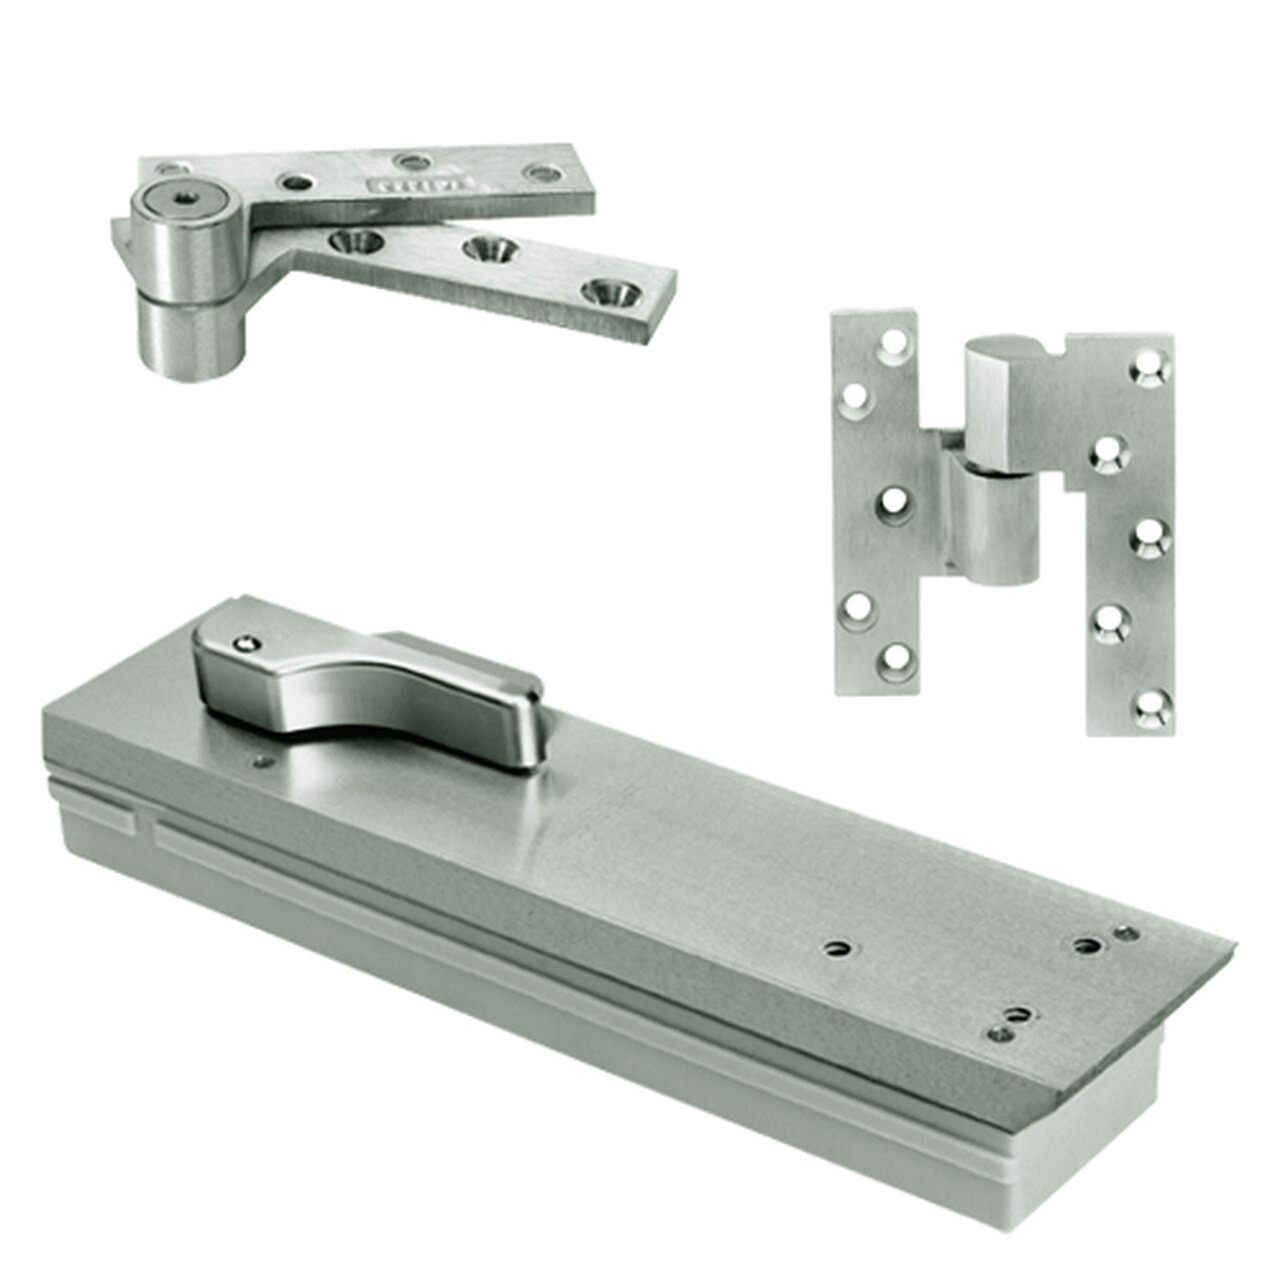 FQ5104NBC-LFP-LTP-LH-619 Rixson Q51 Series Fire Rated 3/4" Offset Hung Shallow Depth Floor Closers in Satin Nickel Finish